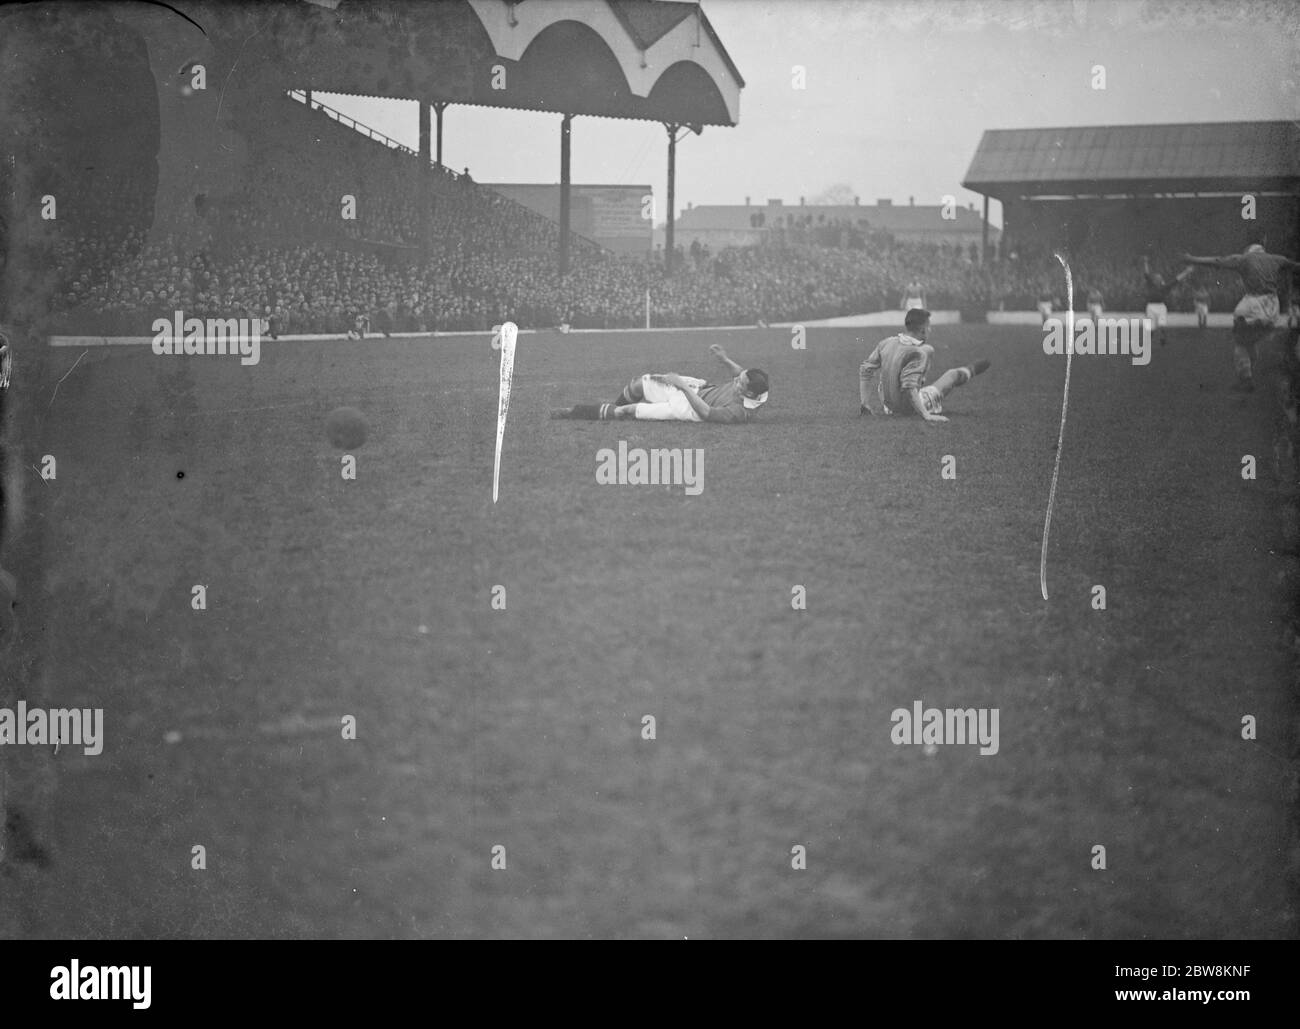 Charlton Athletic football club versus Birmingham City football club . Two players on the floor with the ball past them . 29 January 1938 Stock Photo